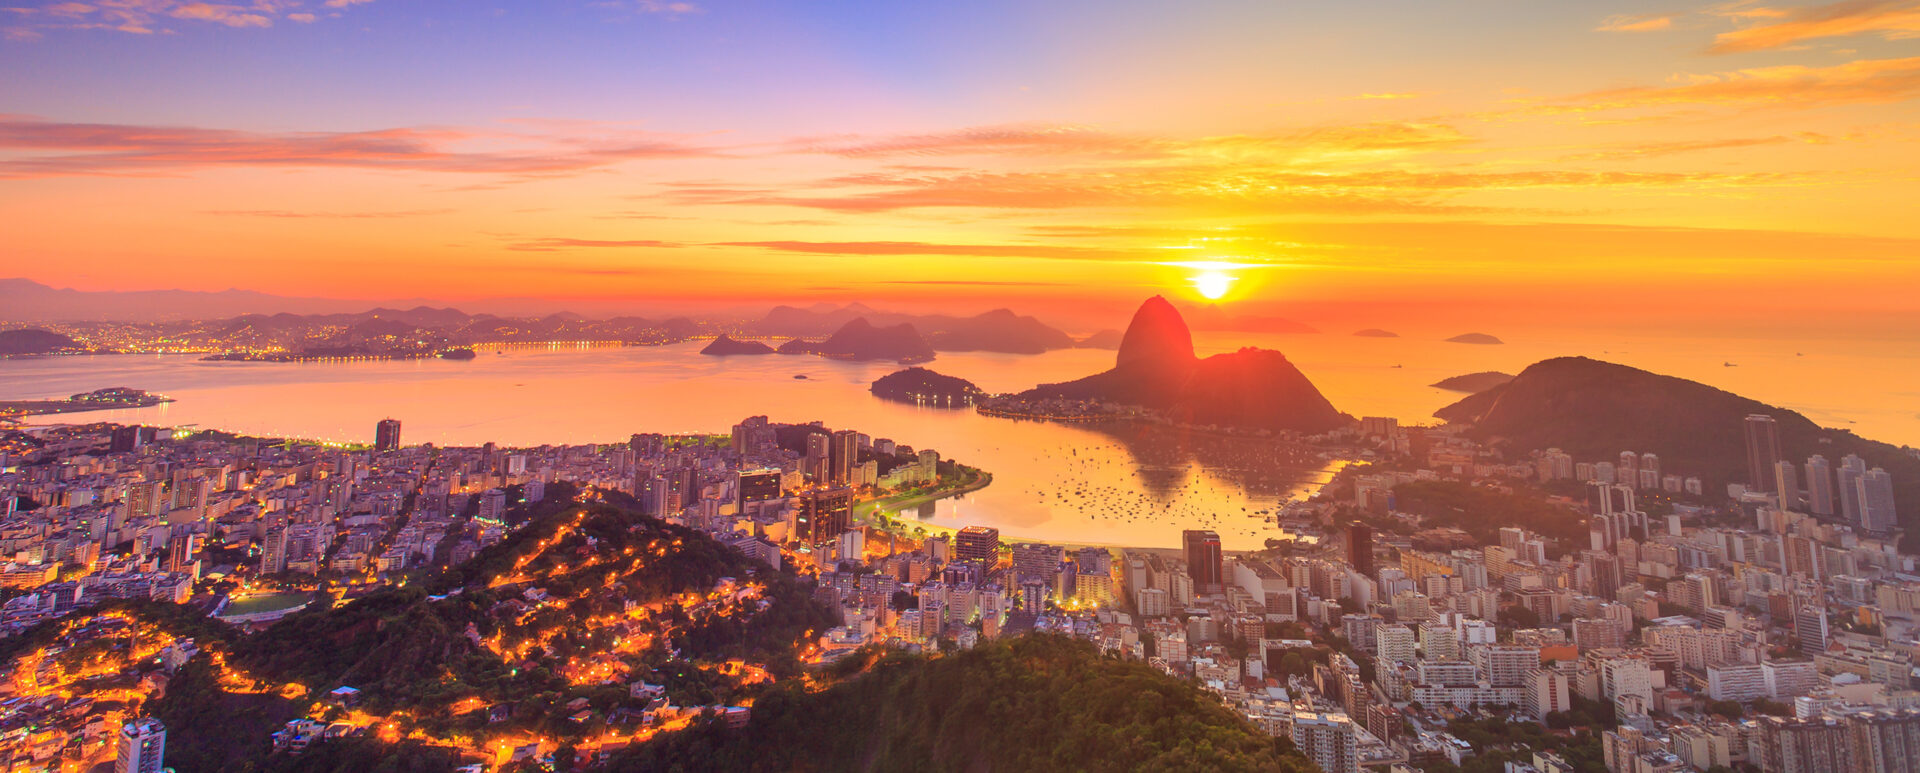 Luxury holidays in Brazil include Rio